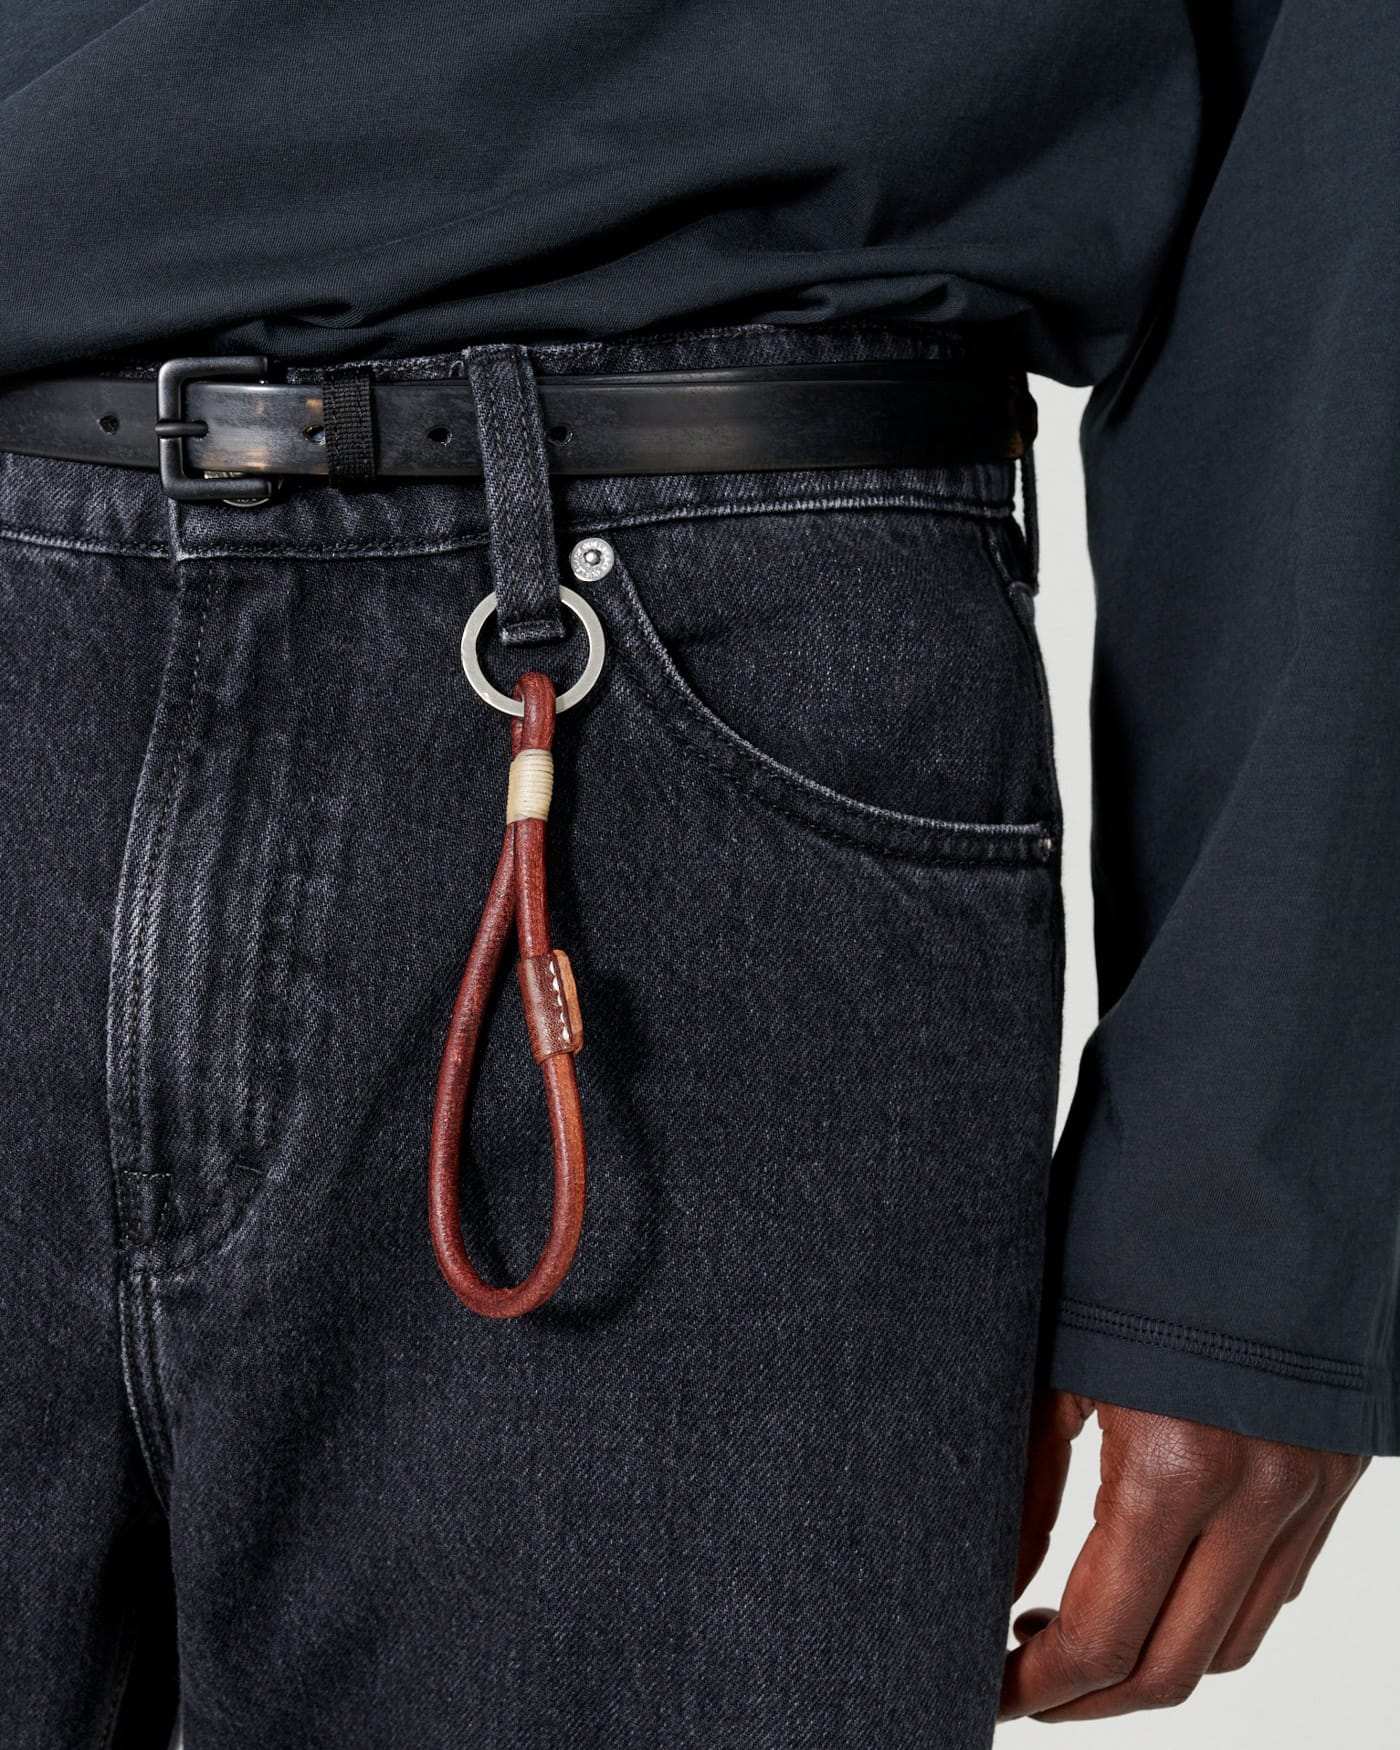 KNOT KEY HOLDER BROWN LEATHER